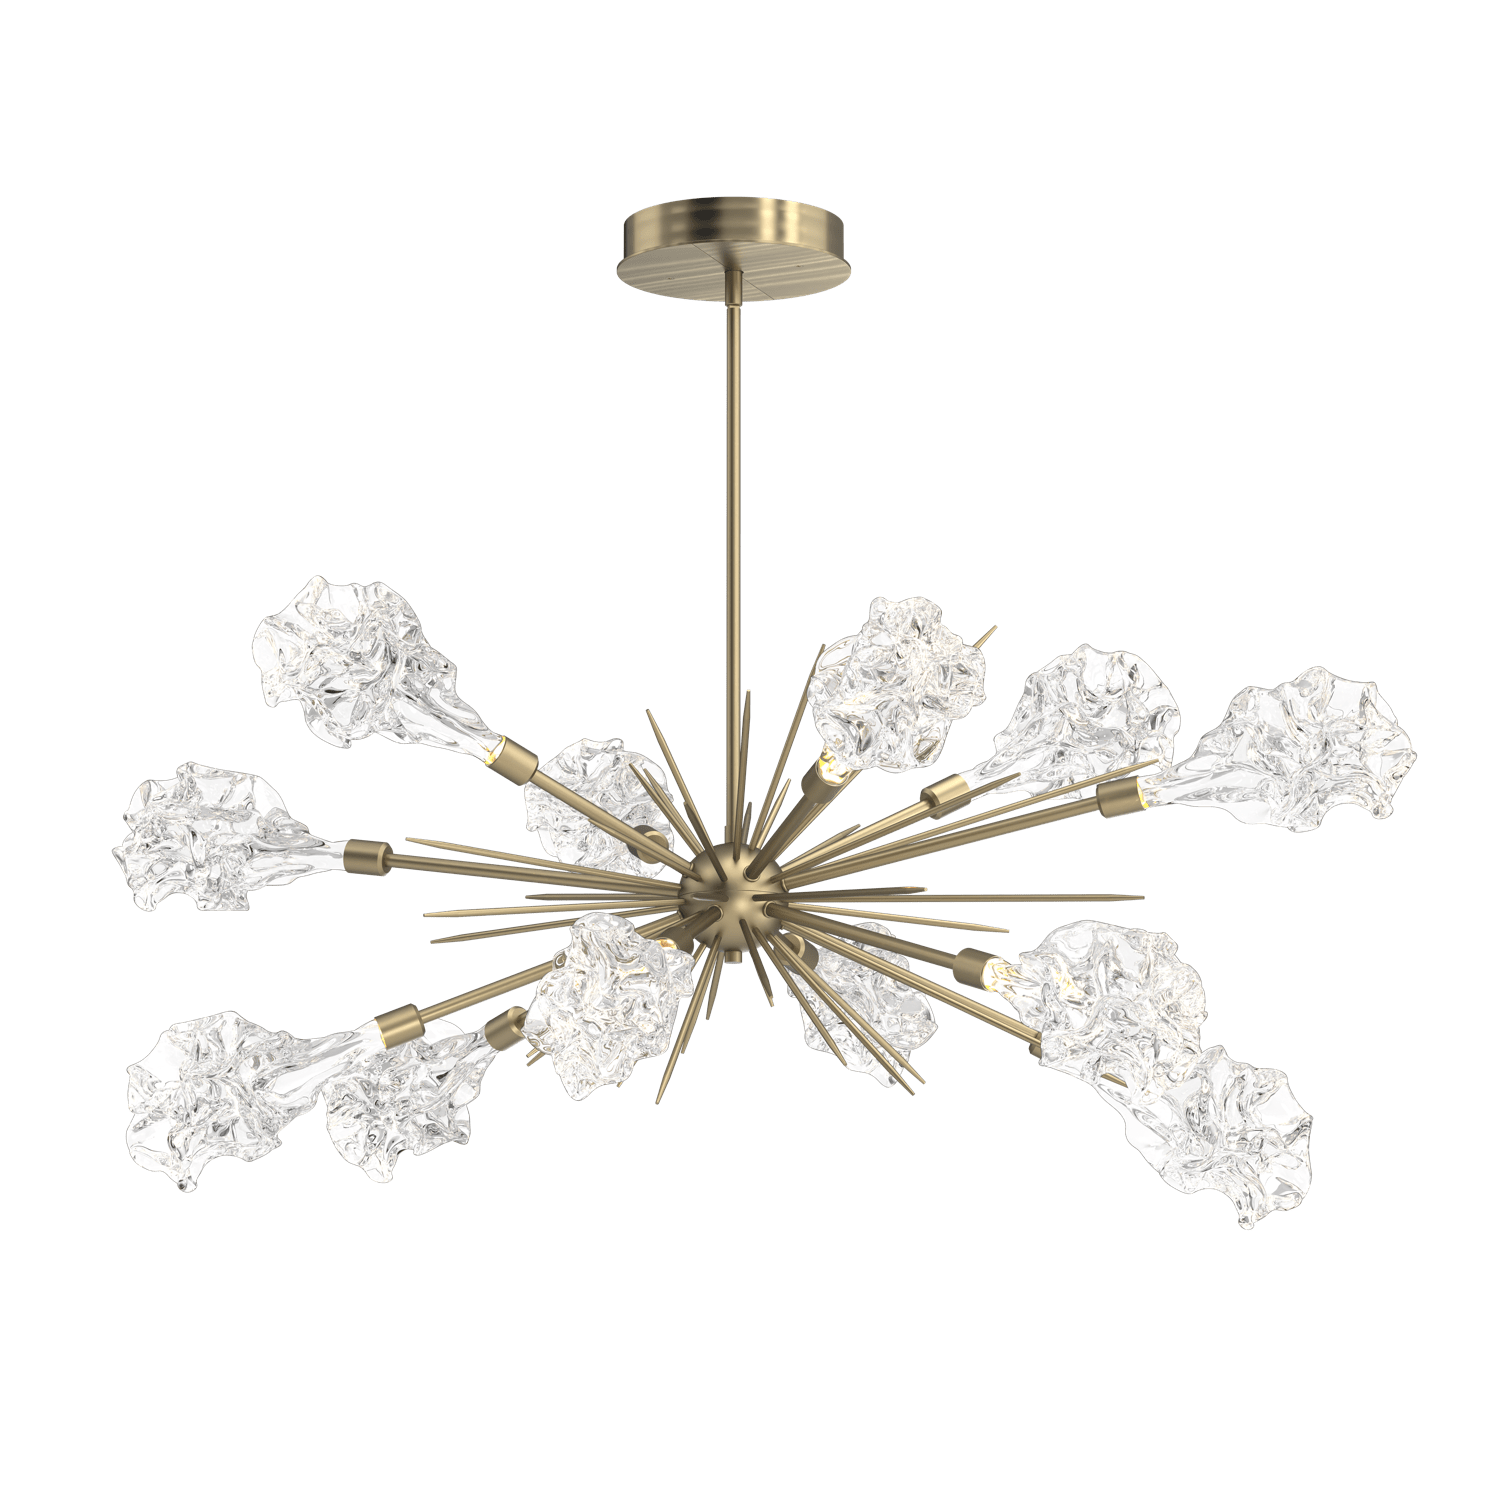 PLB0059-0A-HB-Hammerton-Studio-Blossom-47-inch-oval-starburst-chandelier-with-heritage-brass-finish-and-clear-handblown-crystal-glass-shades-and-LED-lamping